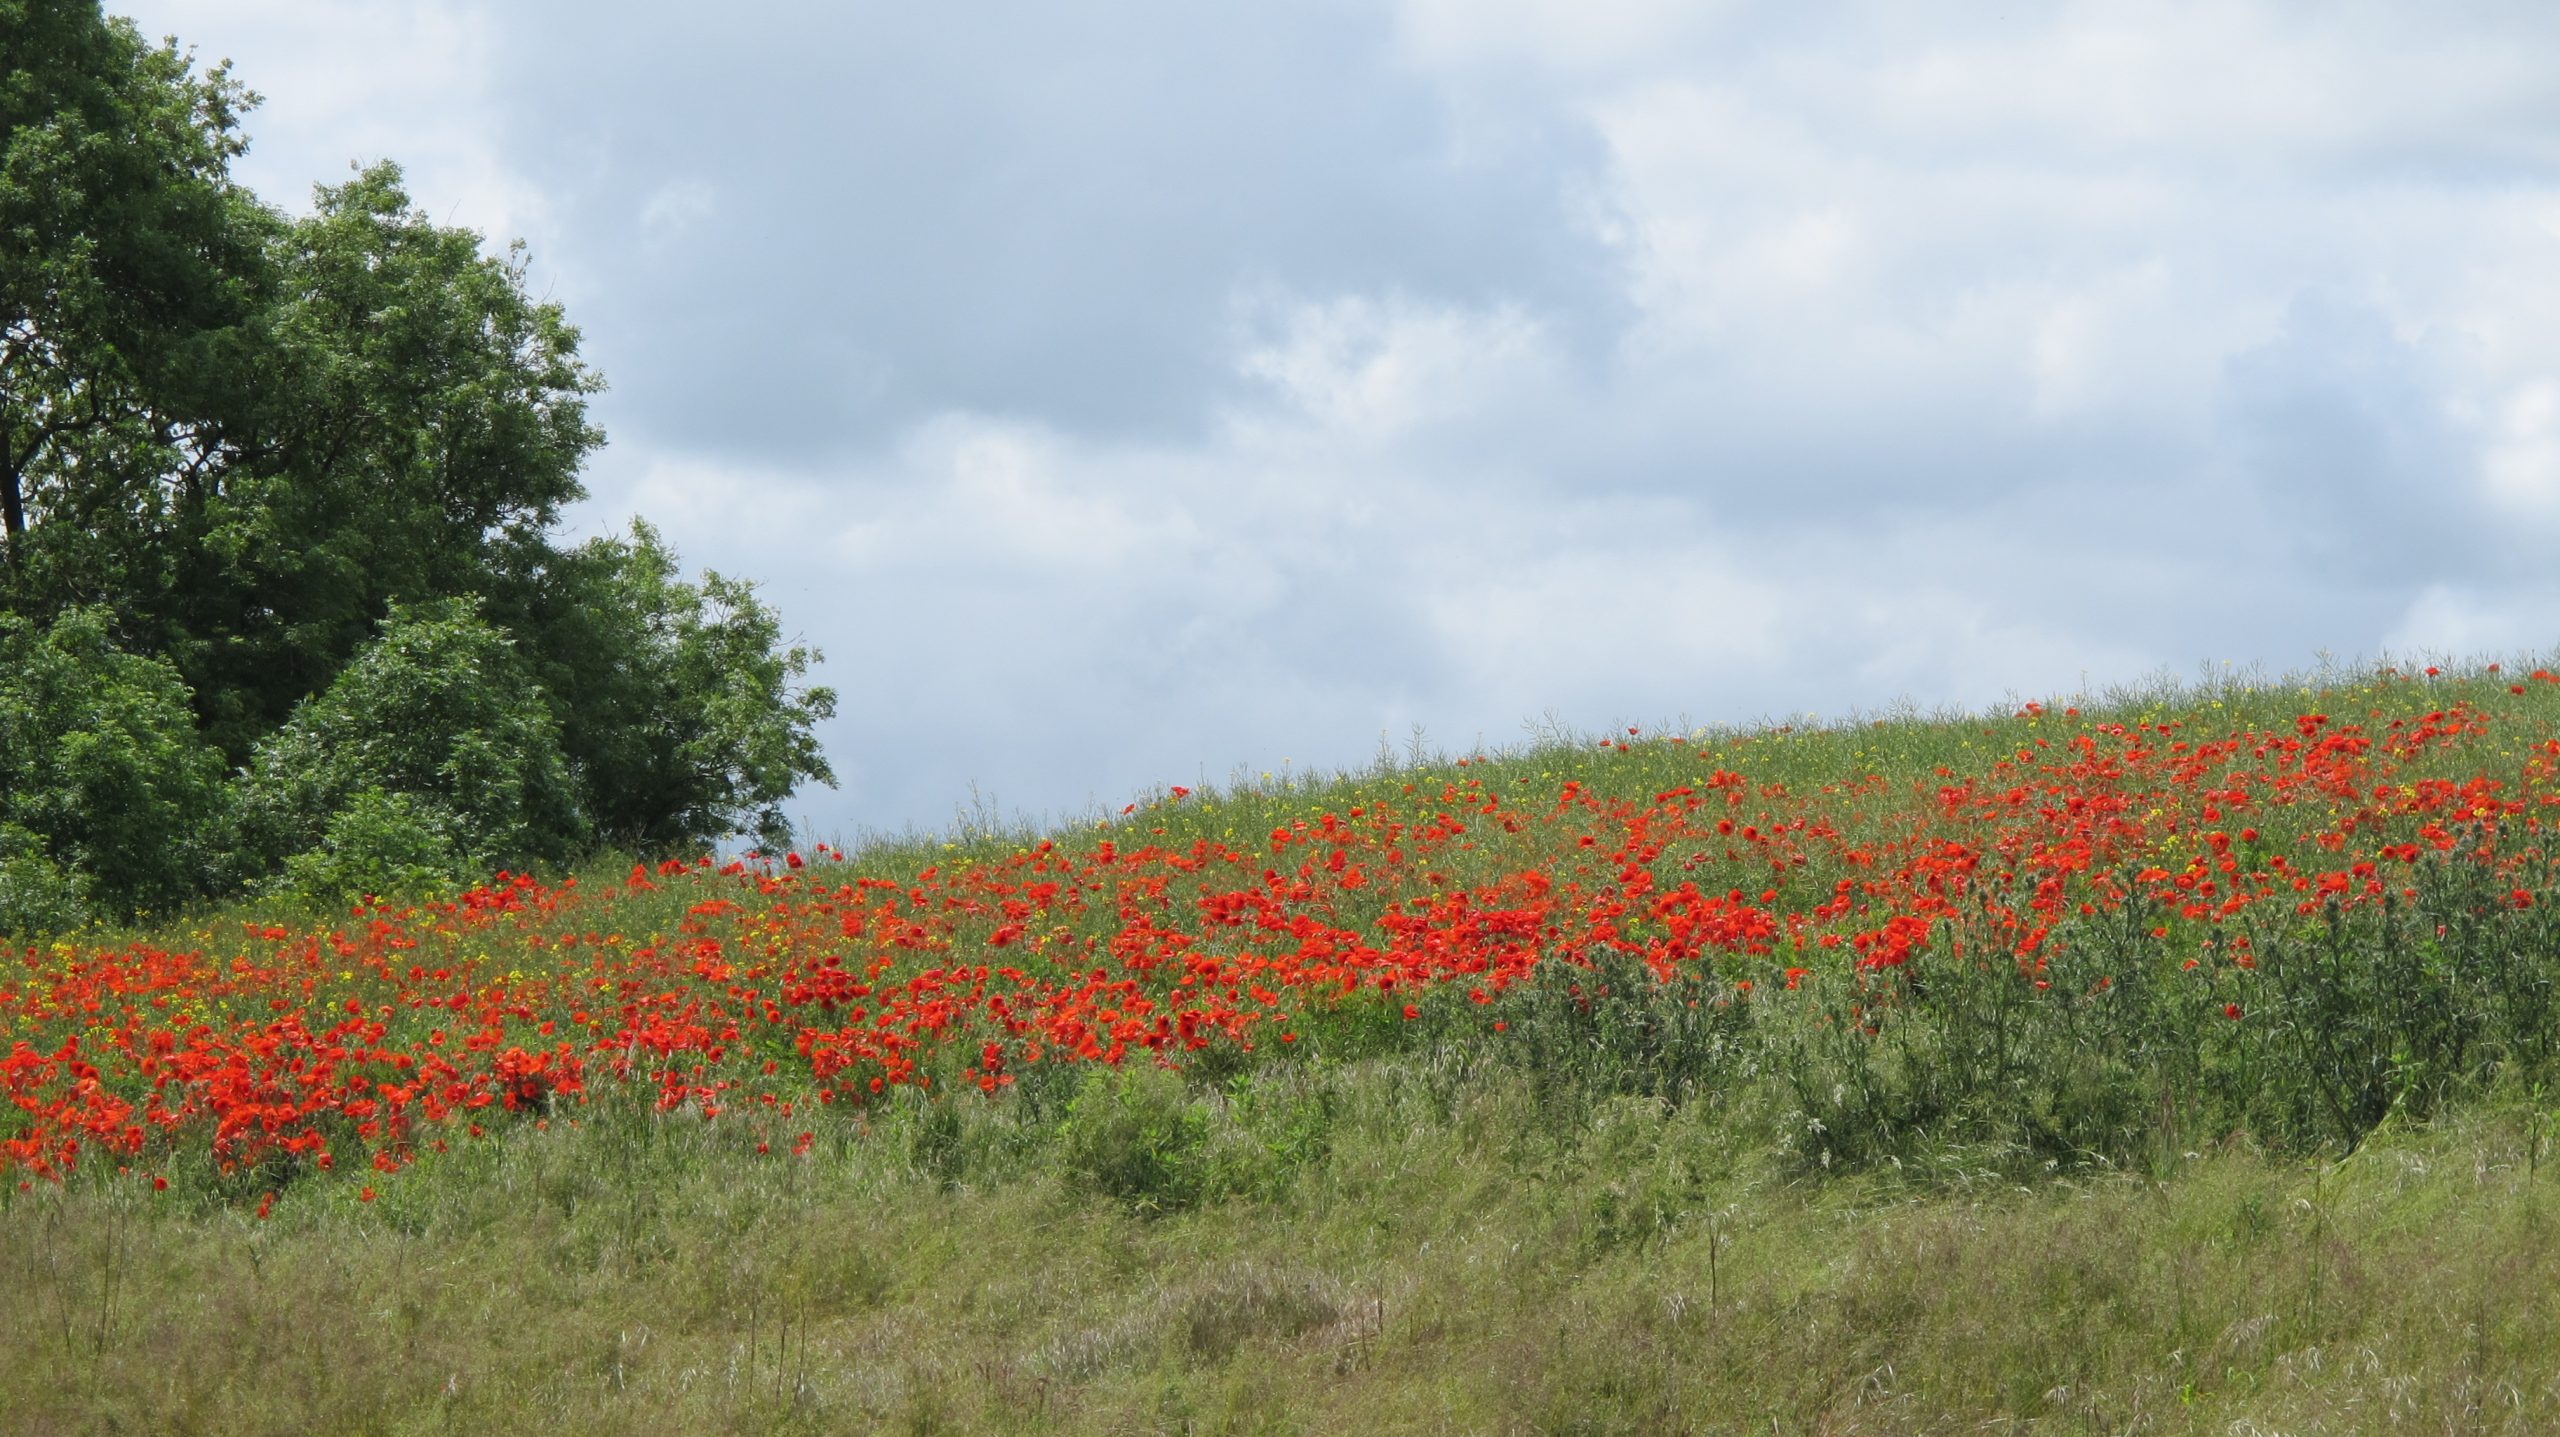 Poppies adding a splash of colour to the green countryside